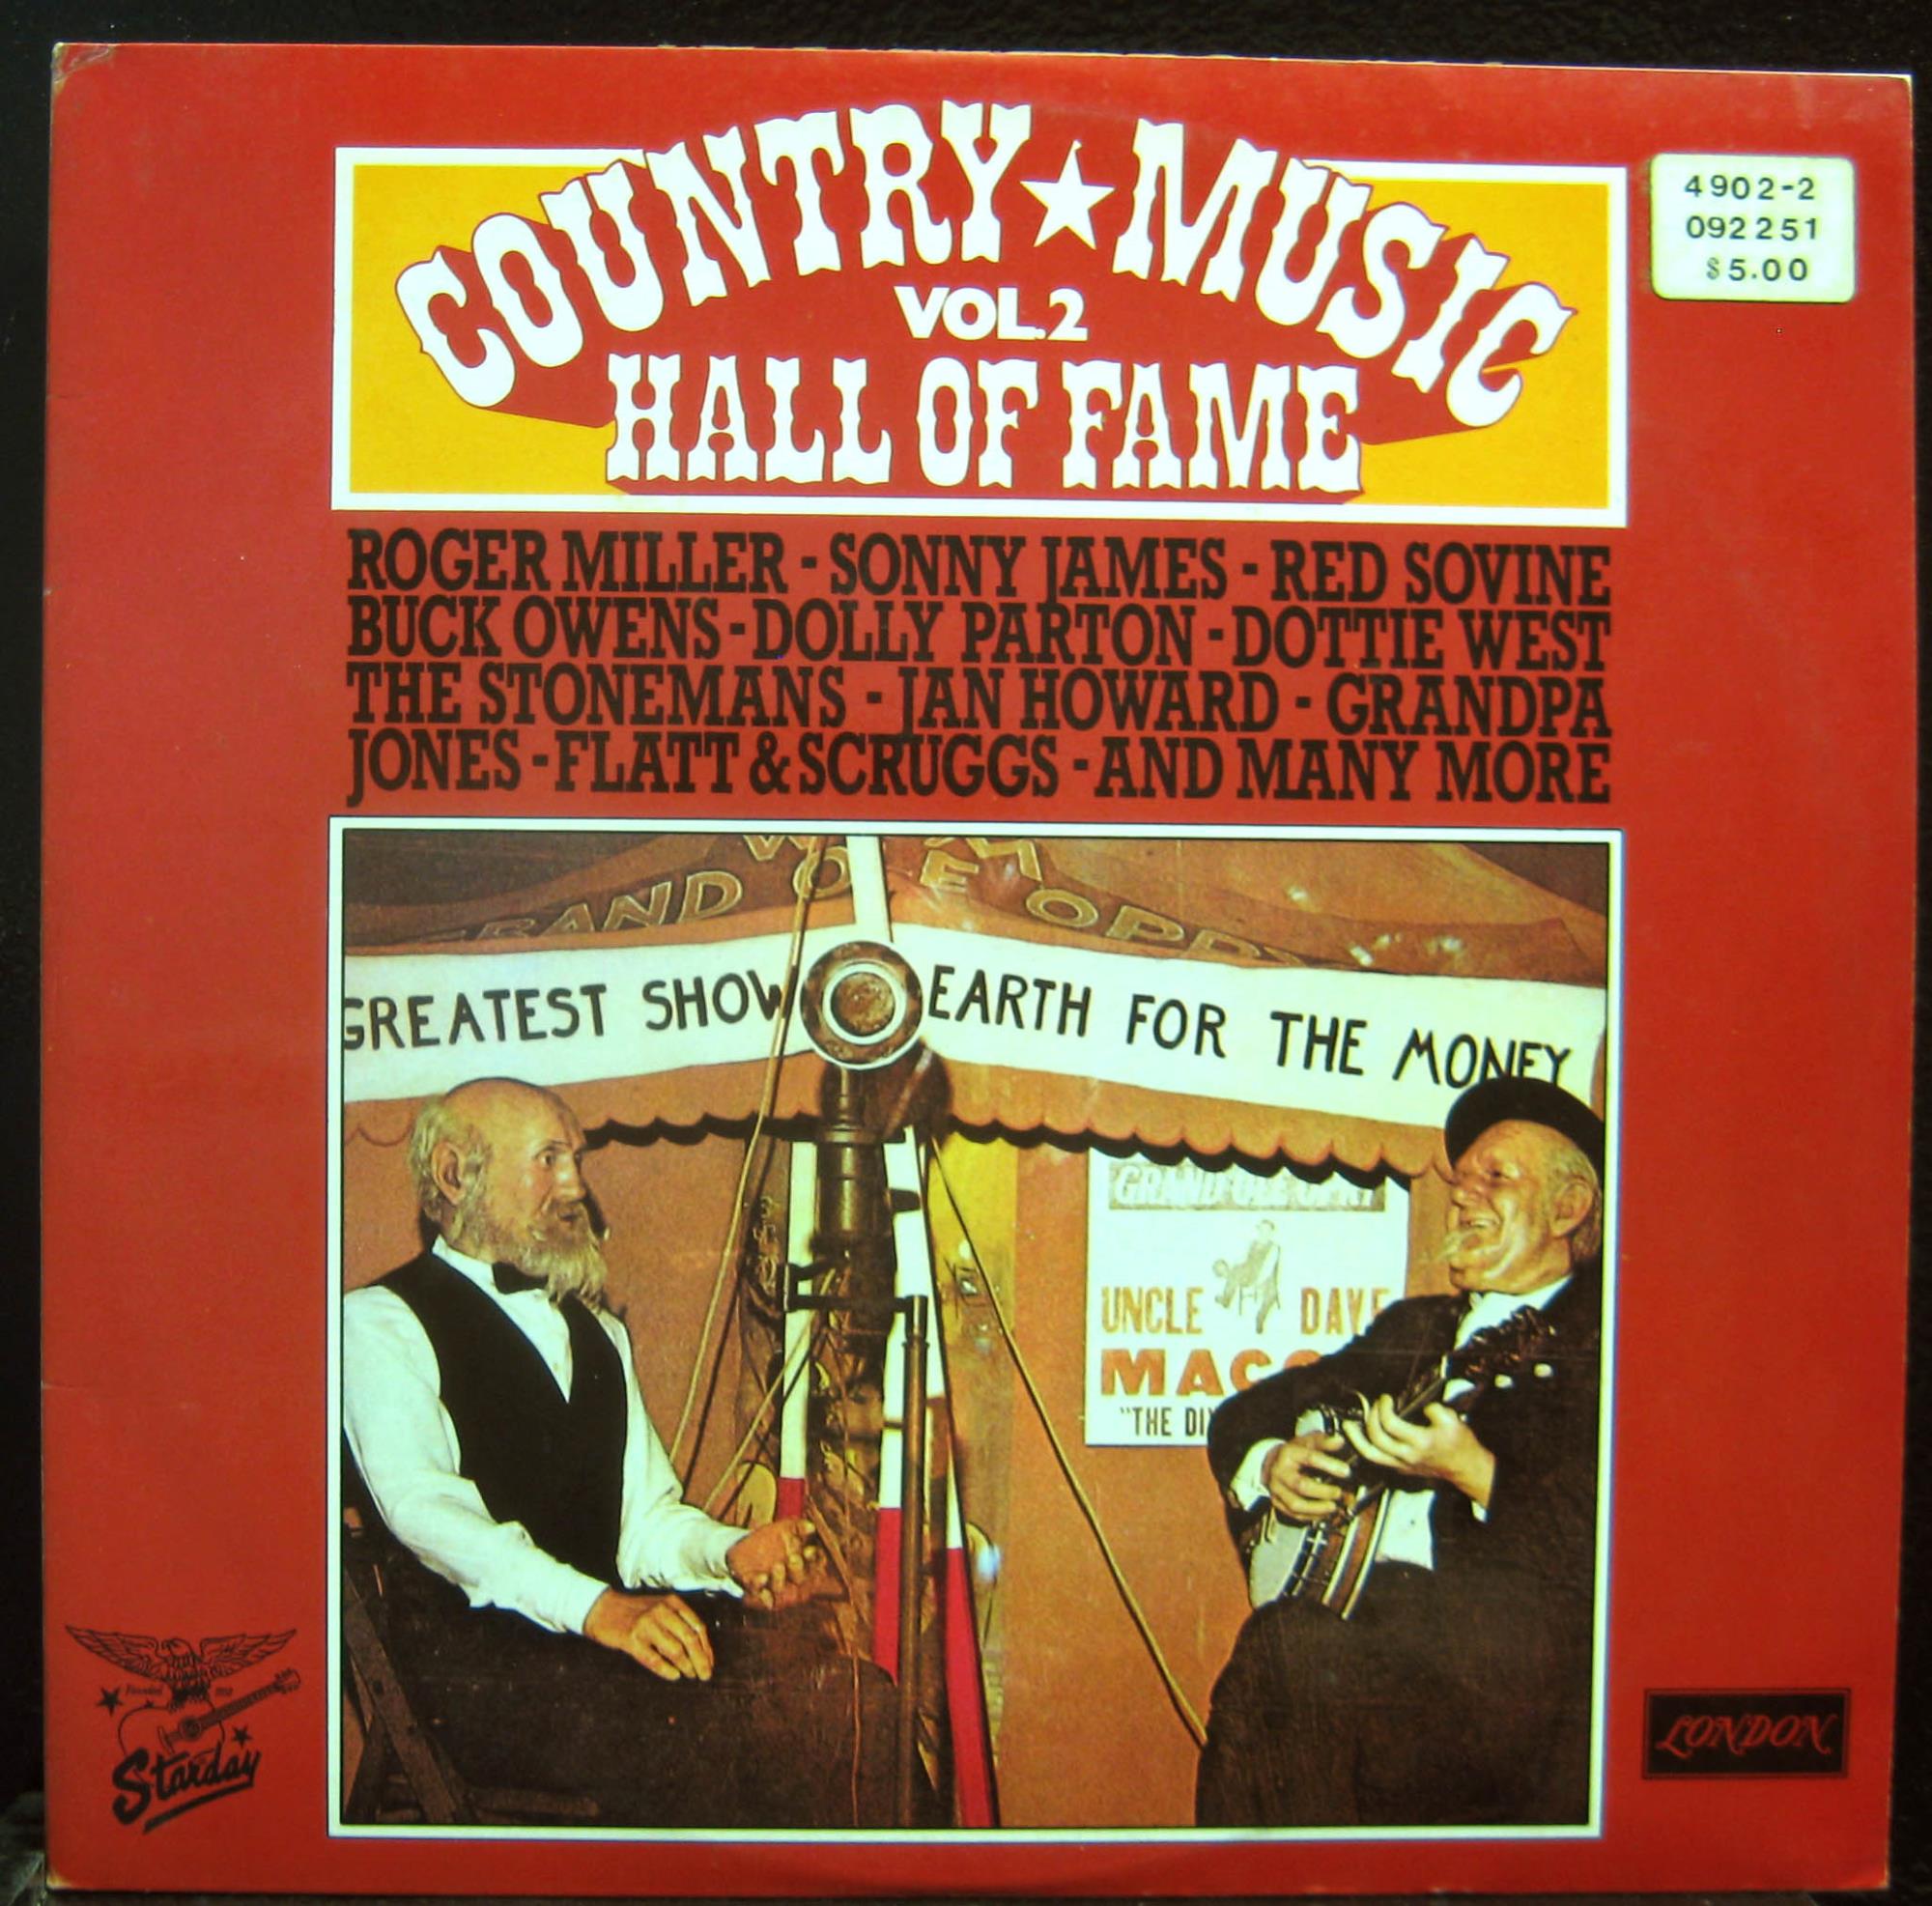 Hall of fame single cover